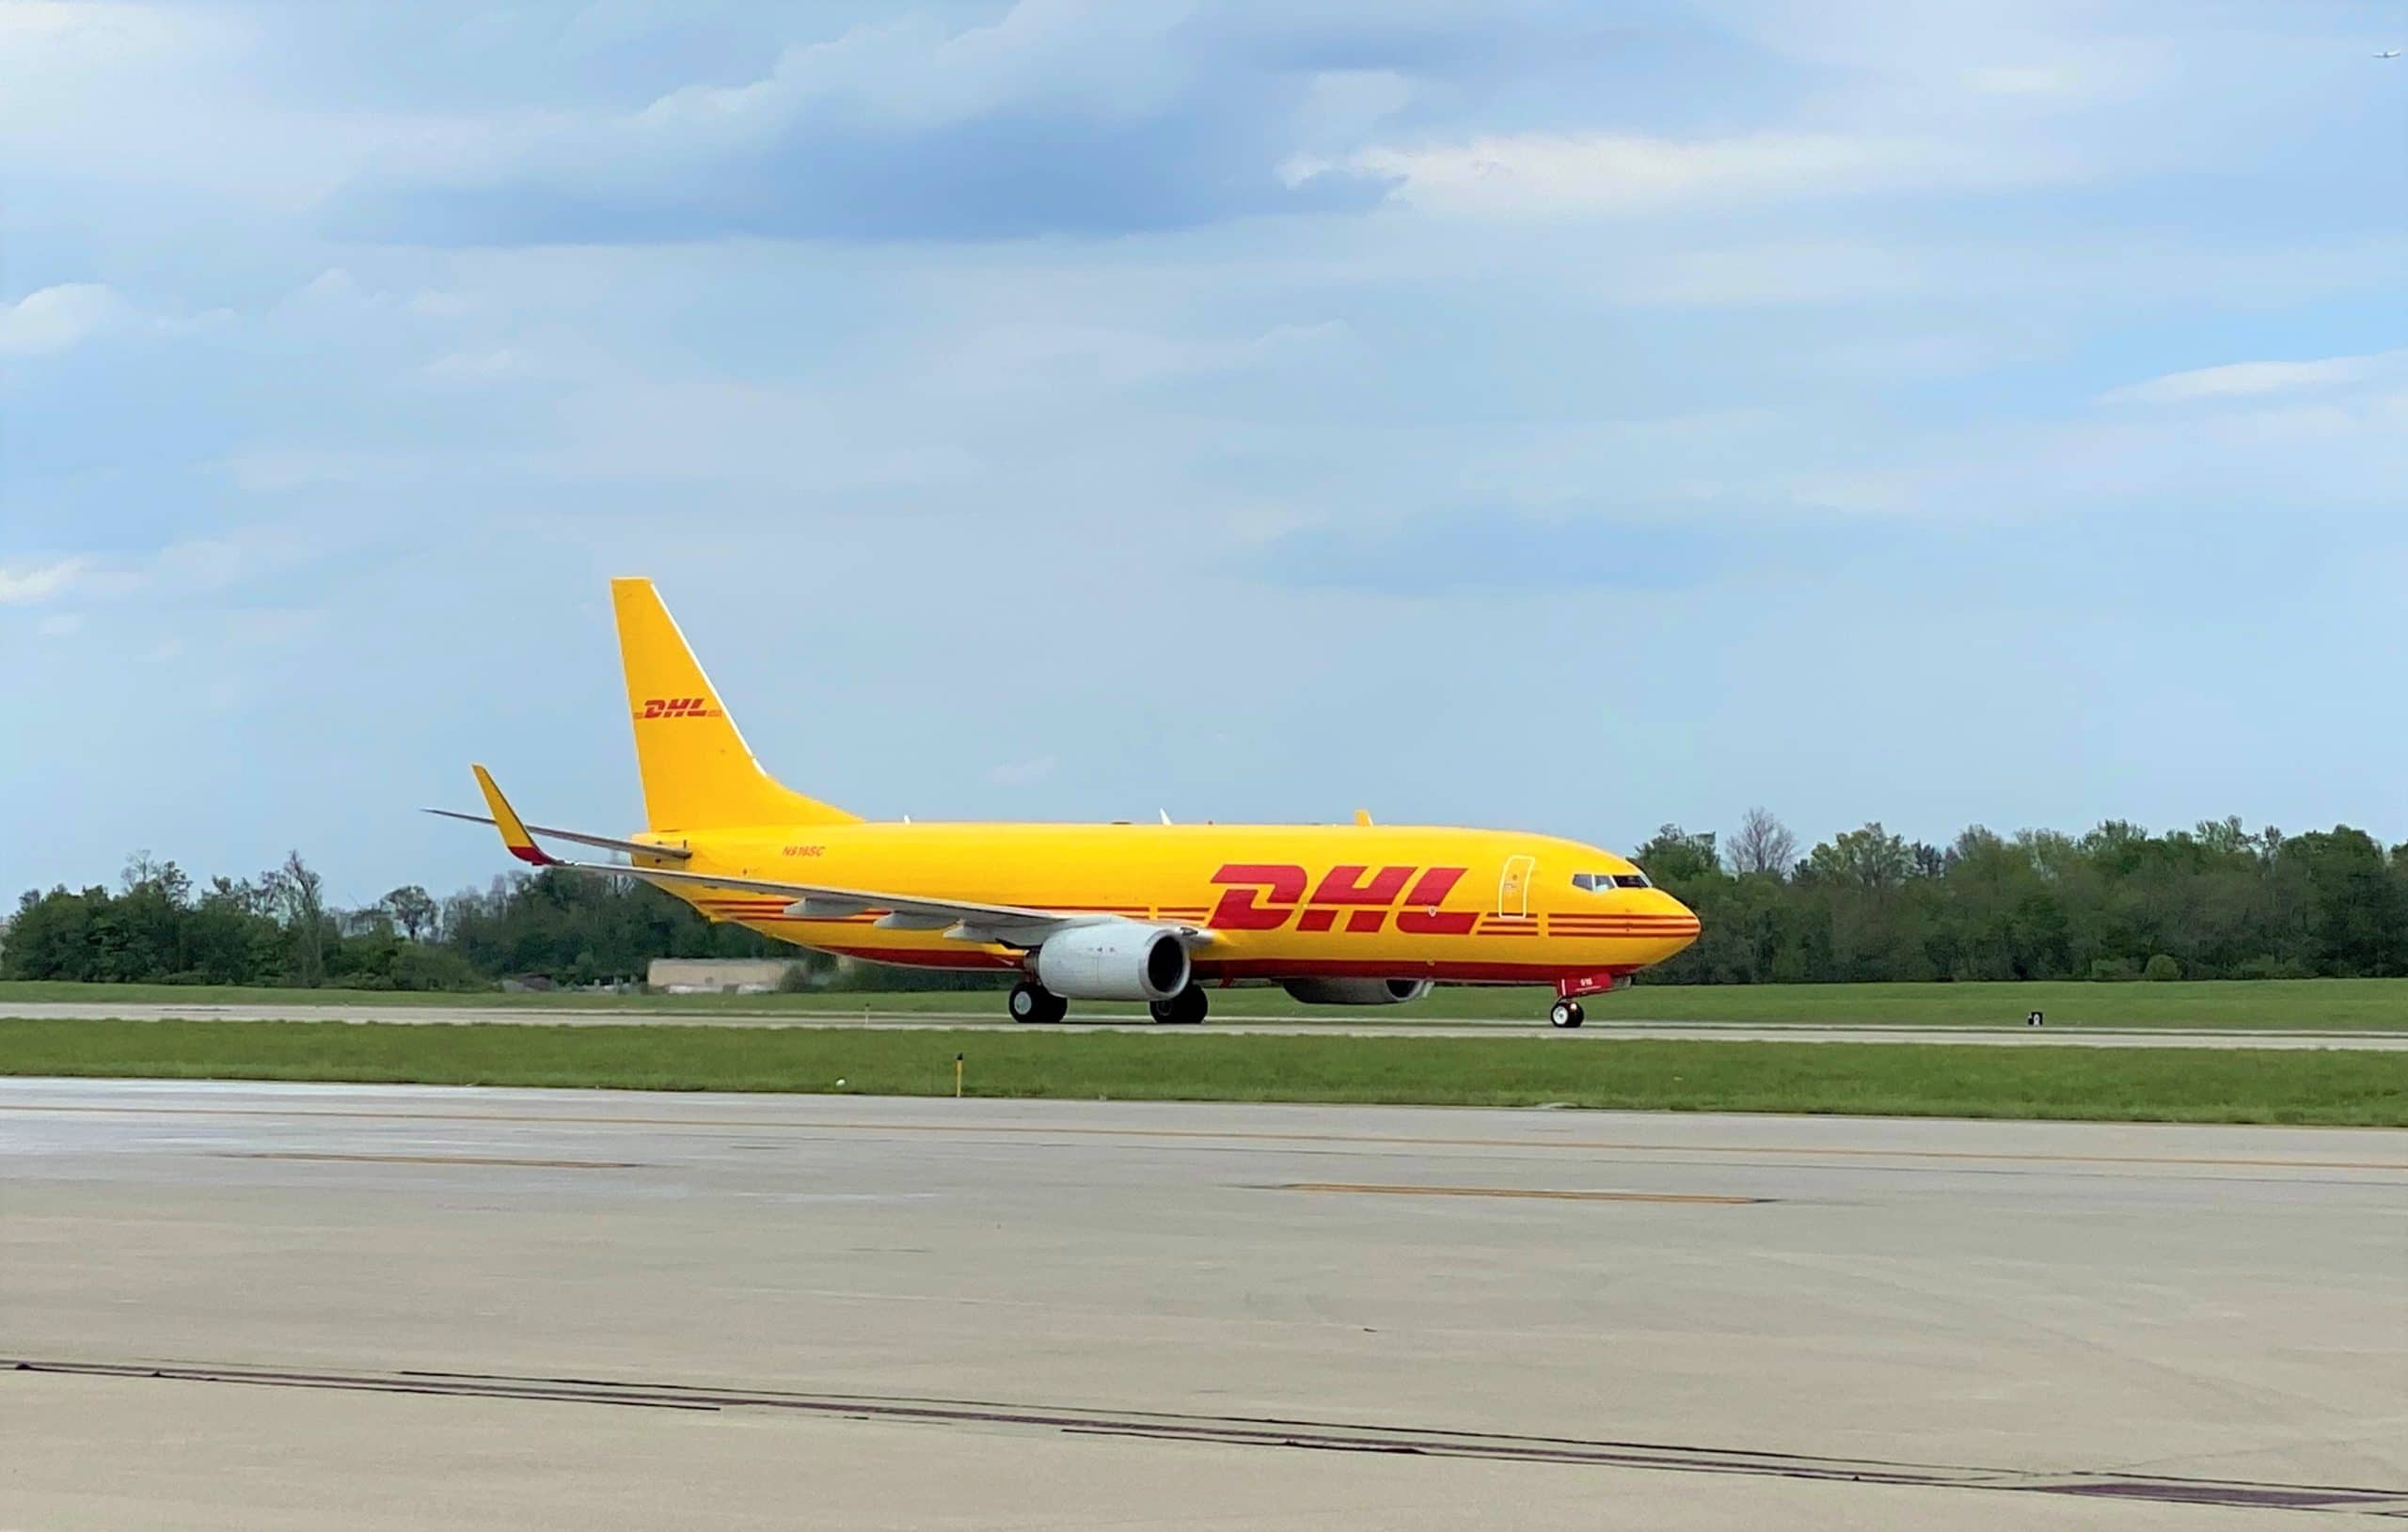 DHL begins rolling out 737-800Fs in Europe